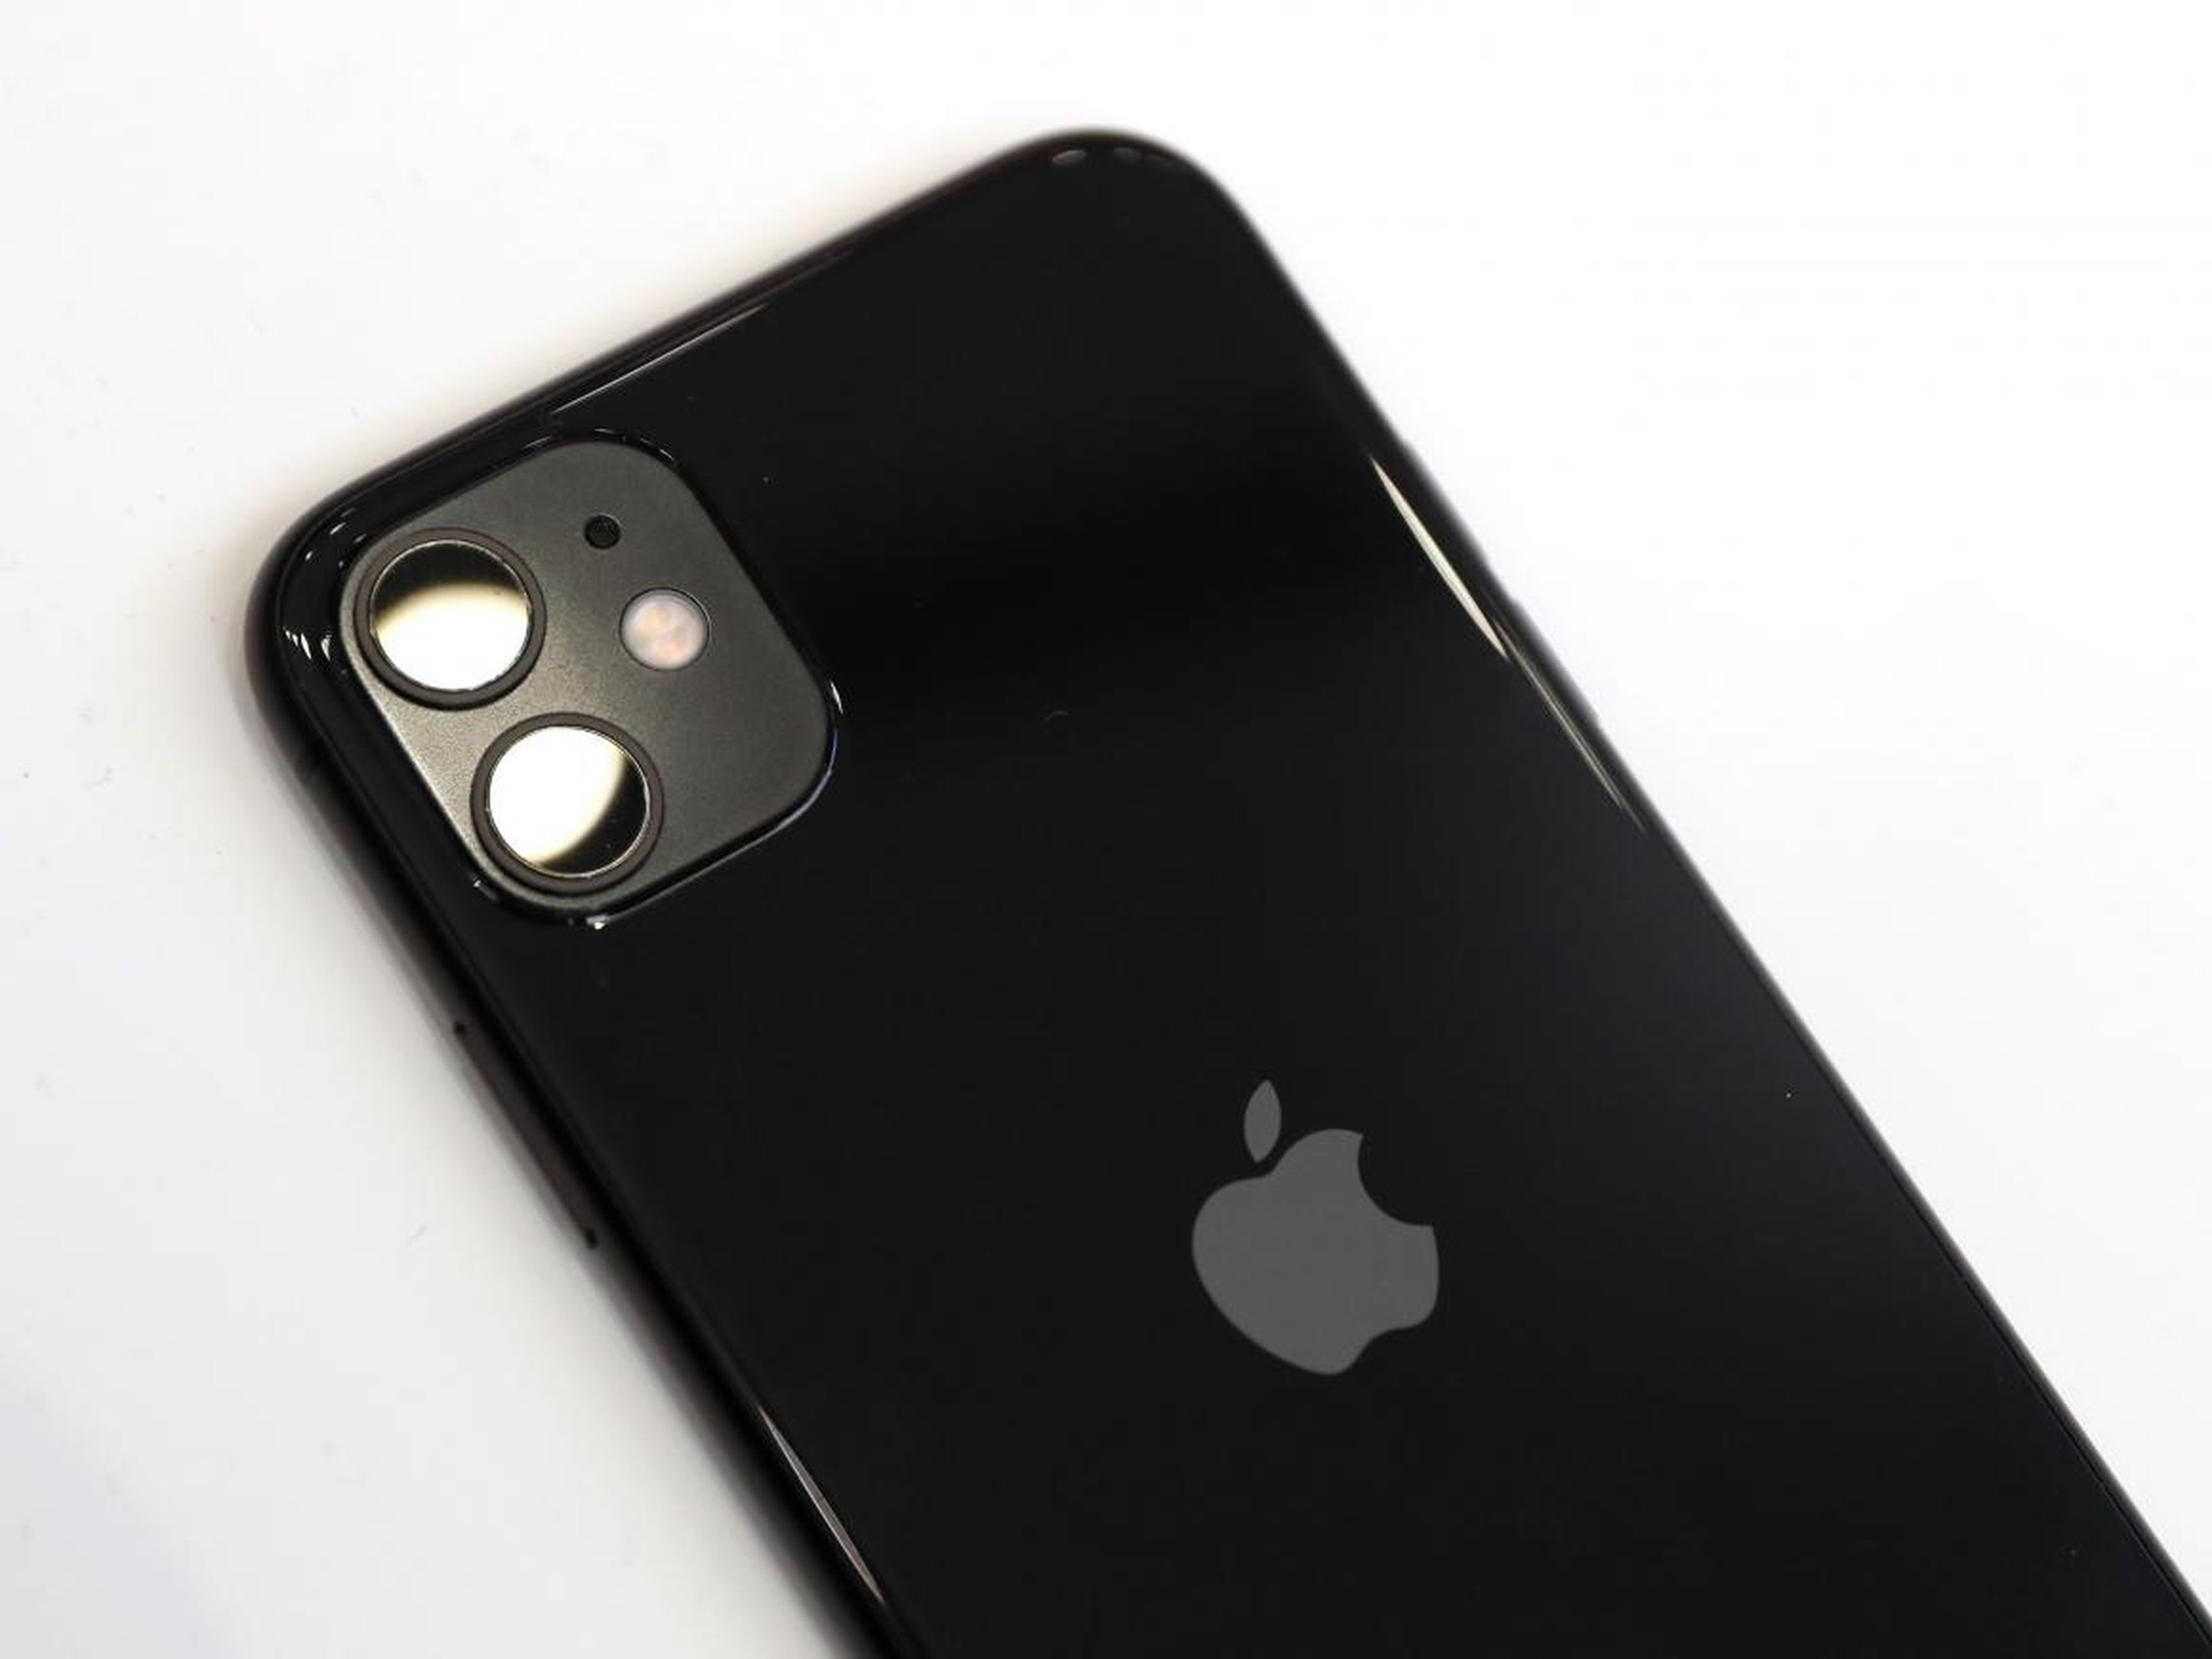 Meanwhile, TechCrunch focused on the iPhone 11's cameras, especially the new night-mode feature designed to take vivid, high-quality pictures at night.